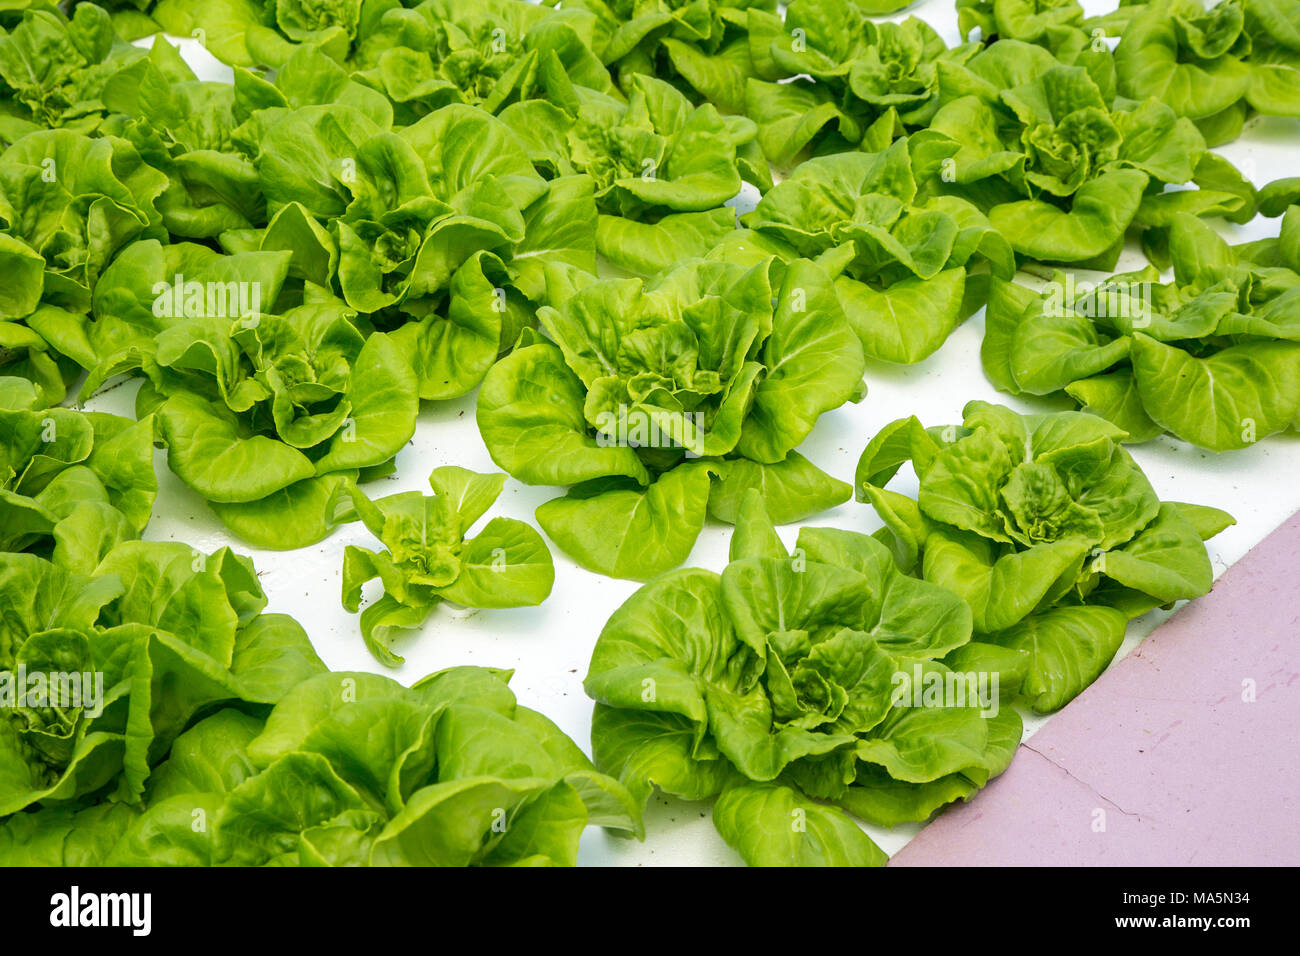 Hydroponic Agriculture, Cultivation of Lettuce.  Dyersville, Iowa, USA. Stock Photo